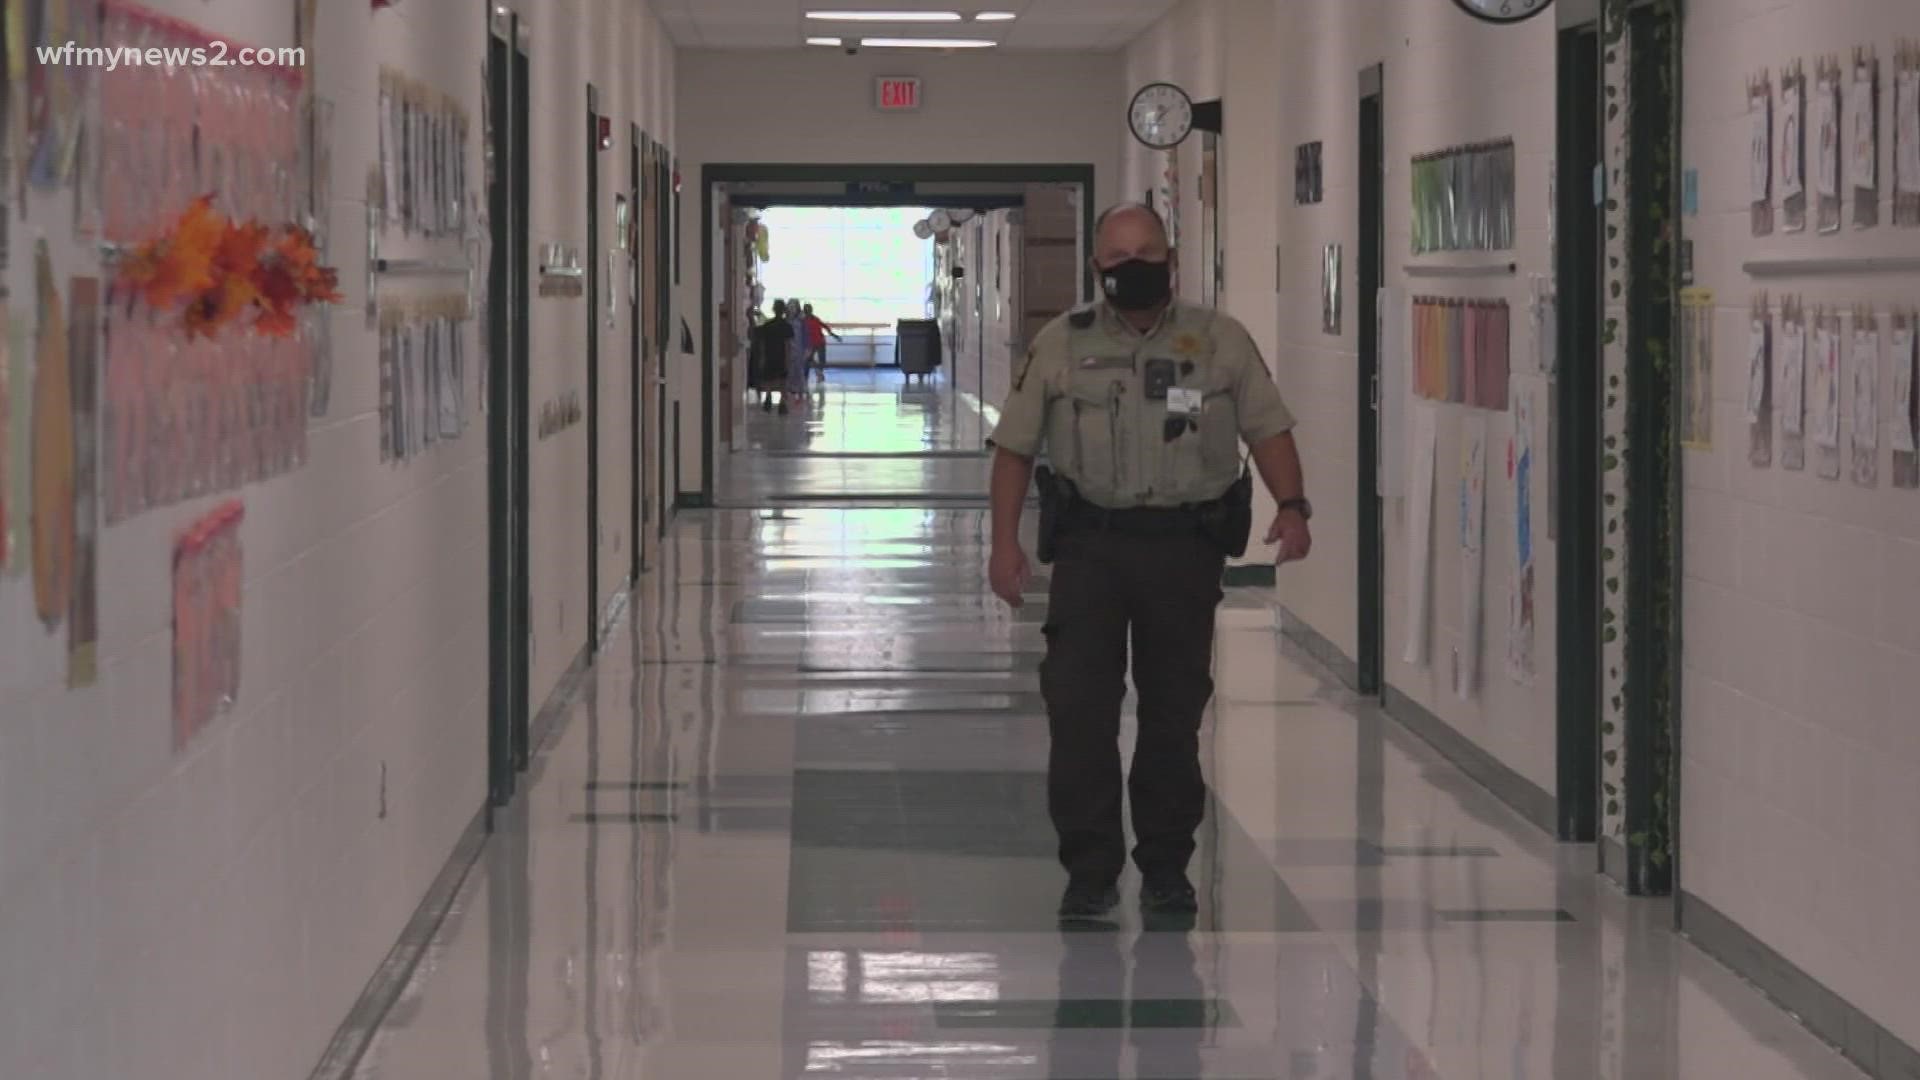 School resource officers have a daily routine to make sure students are safe in Triad elementary, middle and high schools.